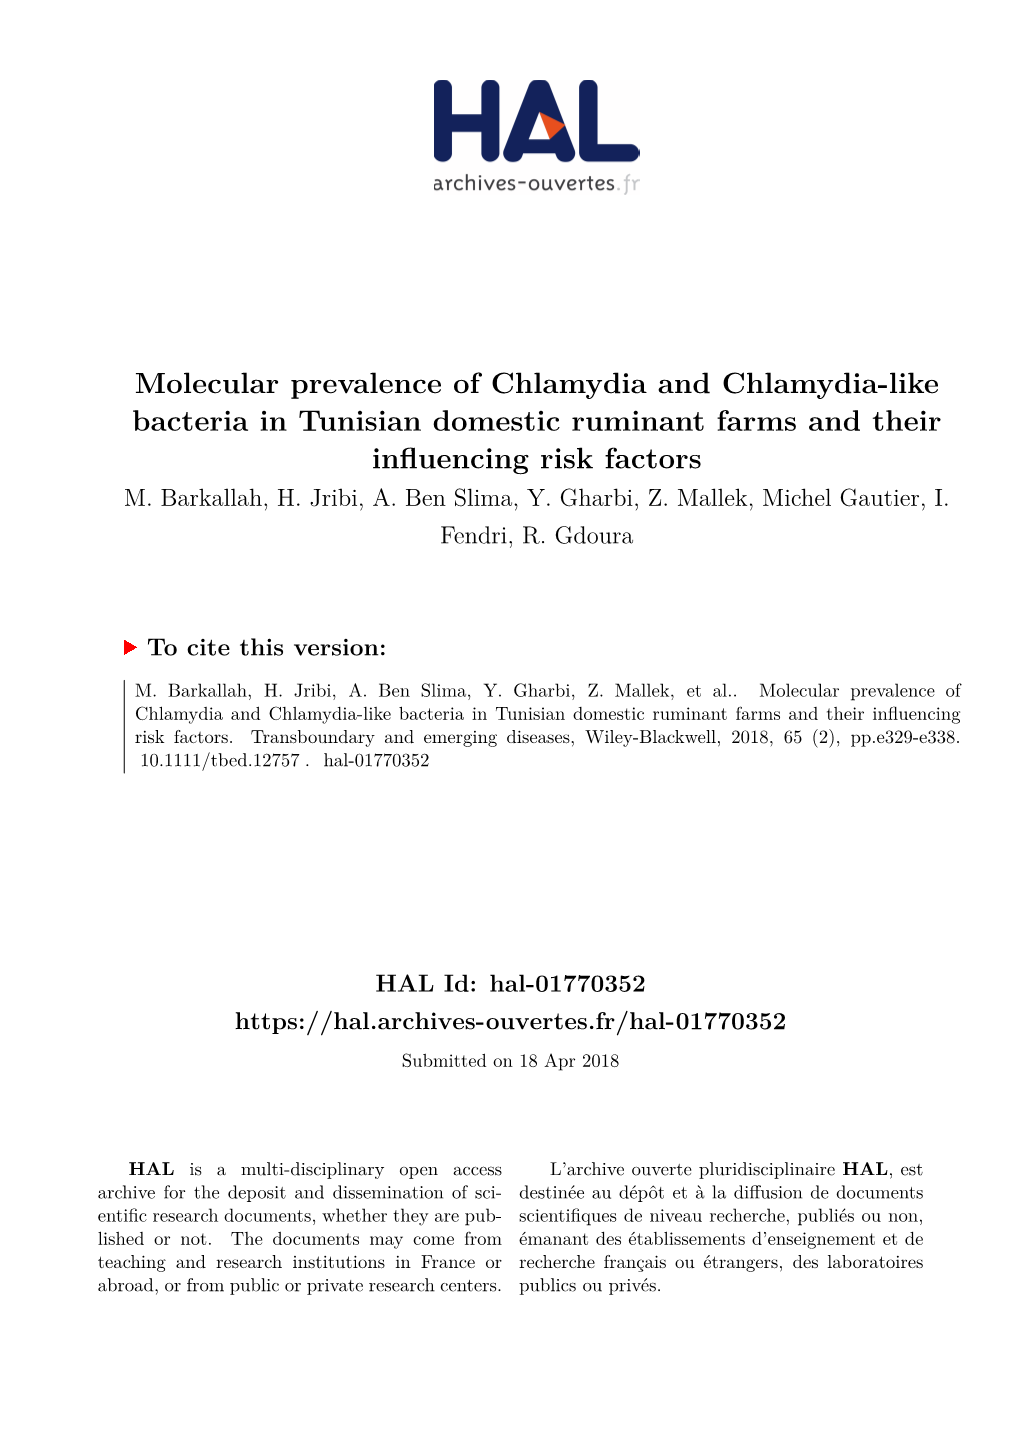 Molecular Prevalence of Chlamydia and Chlamydia-Like Bacteria in Tunisian Domestic Ruminant Farms and Their Influencing Risk Factors M